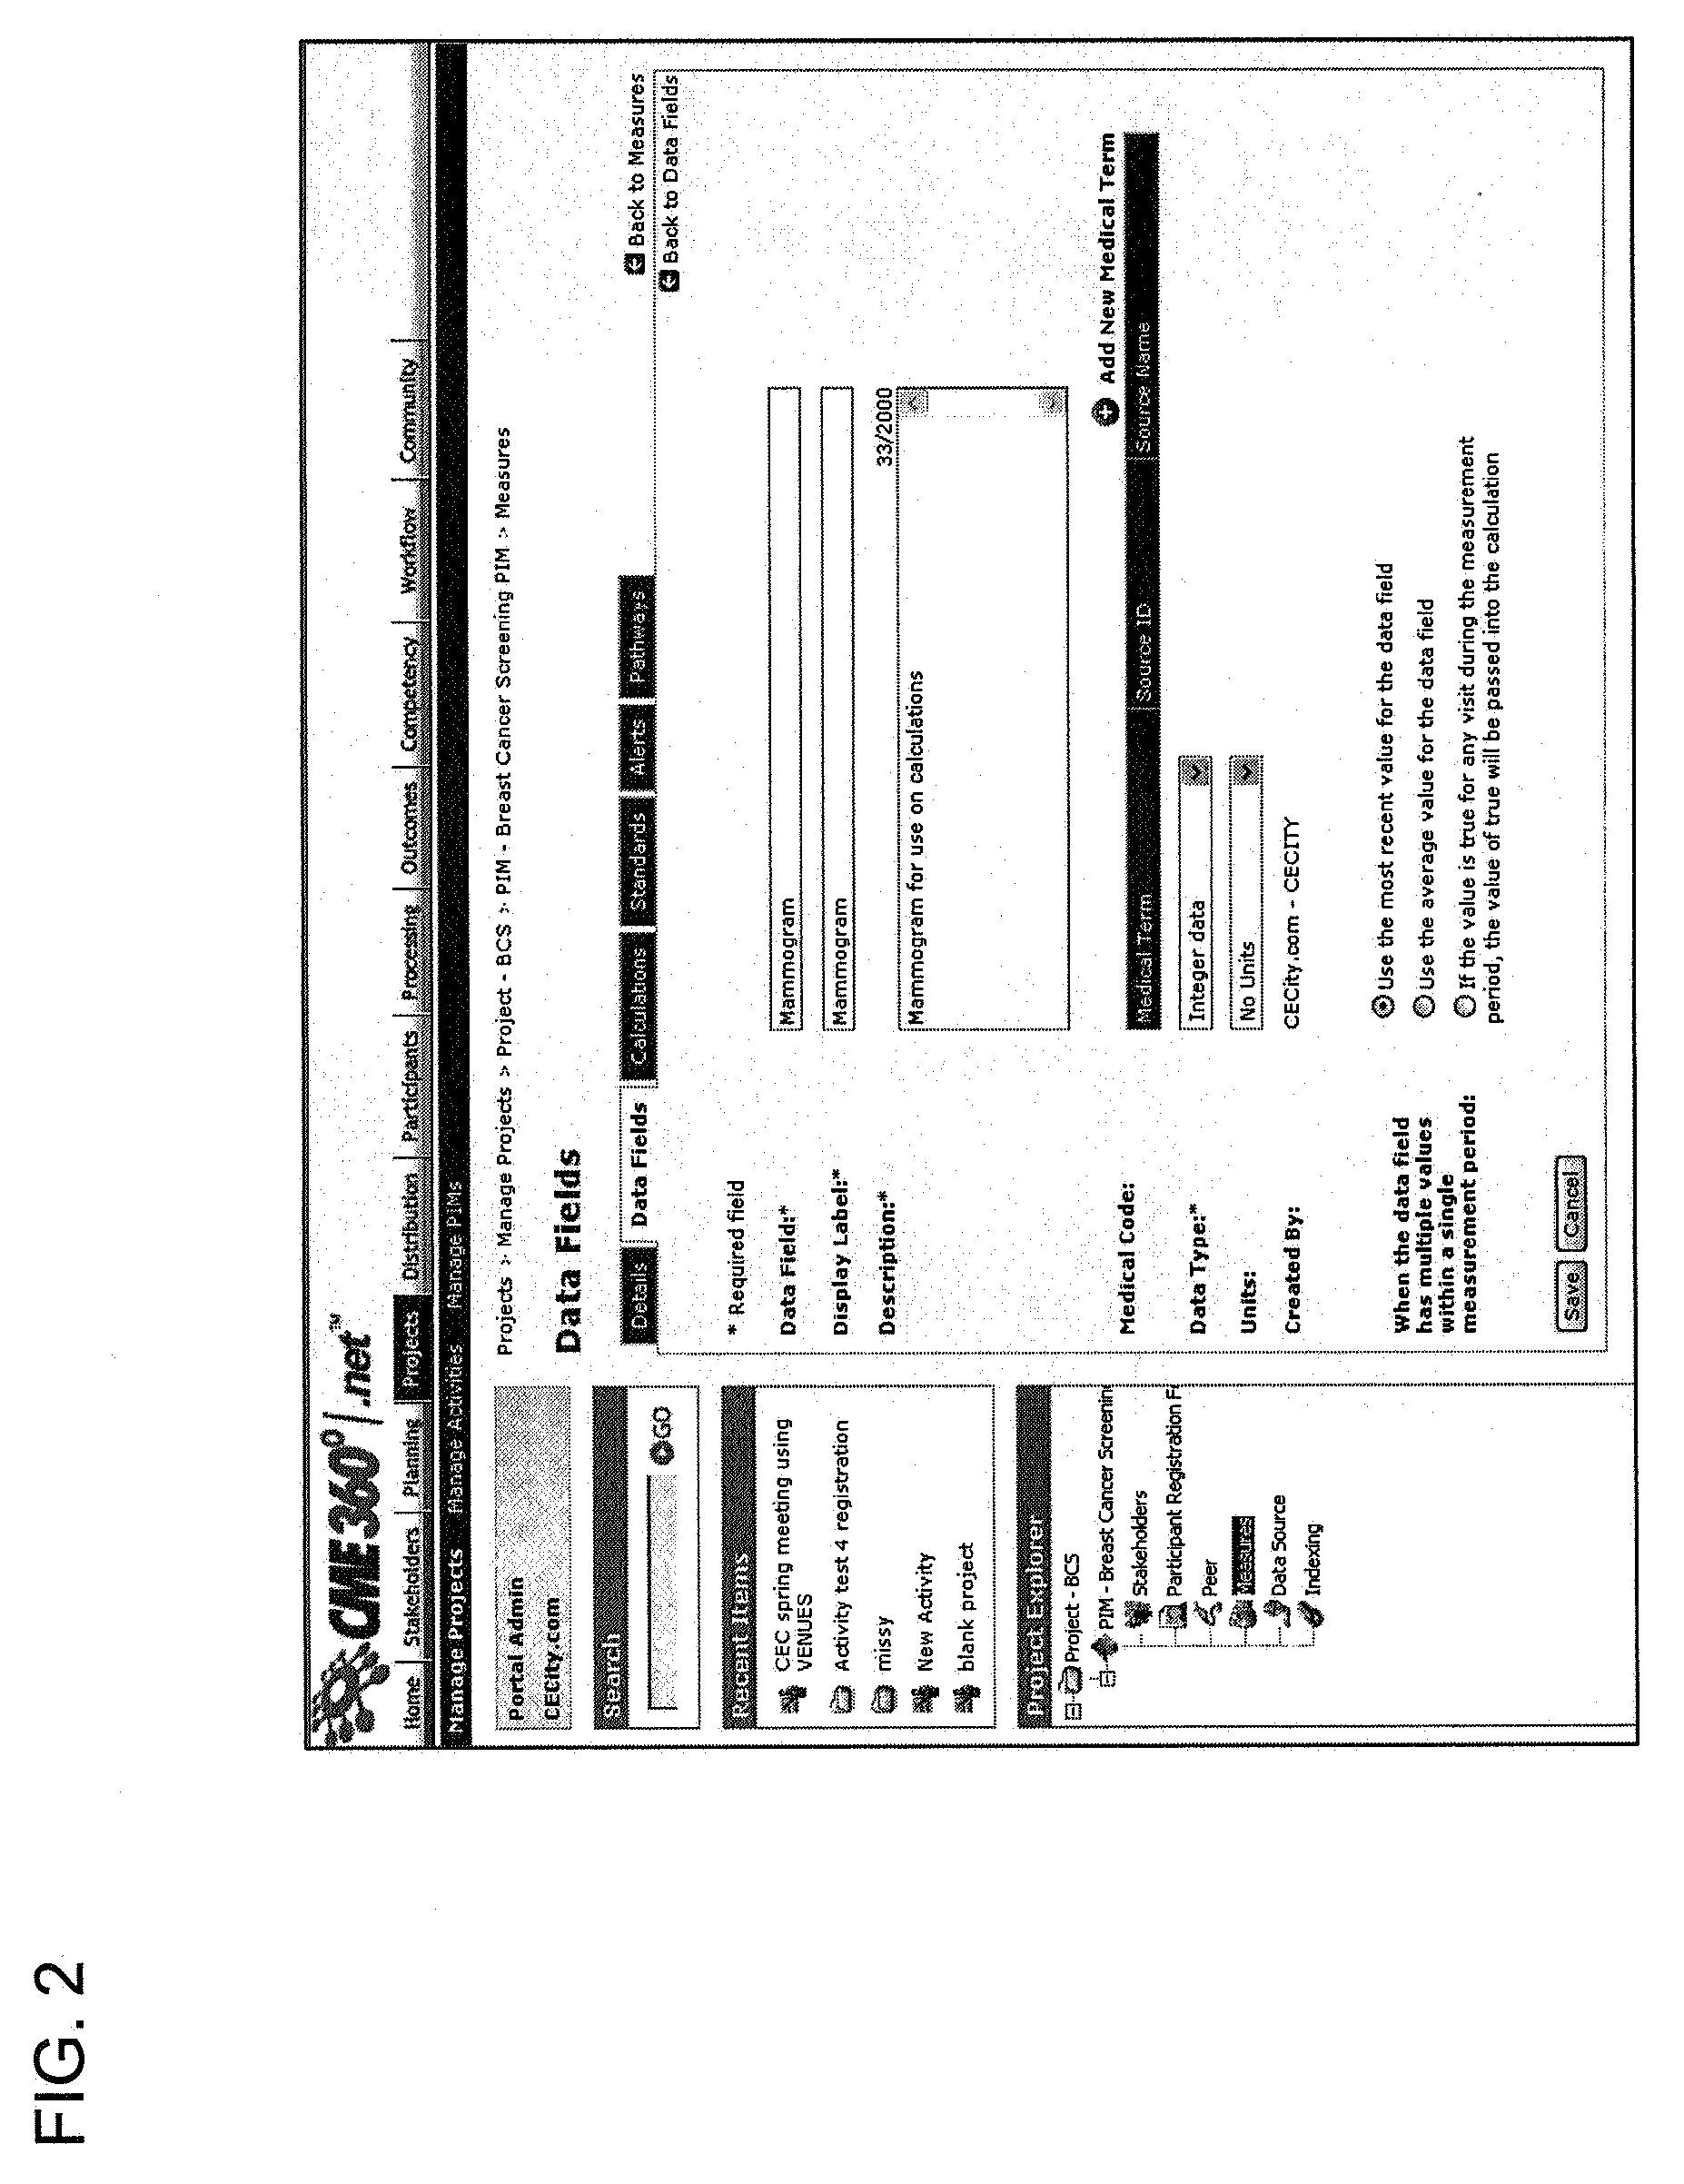 Systems and methods related to continuous performance improvement